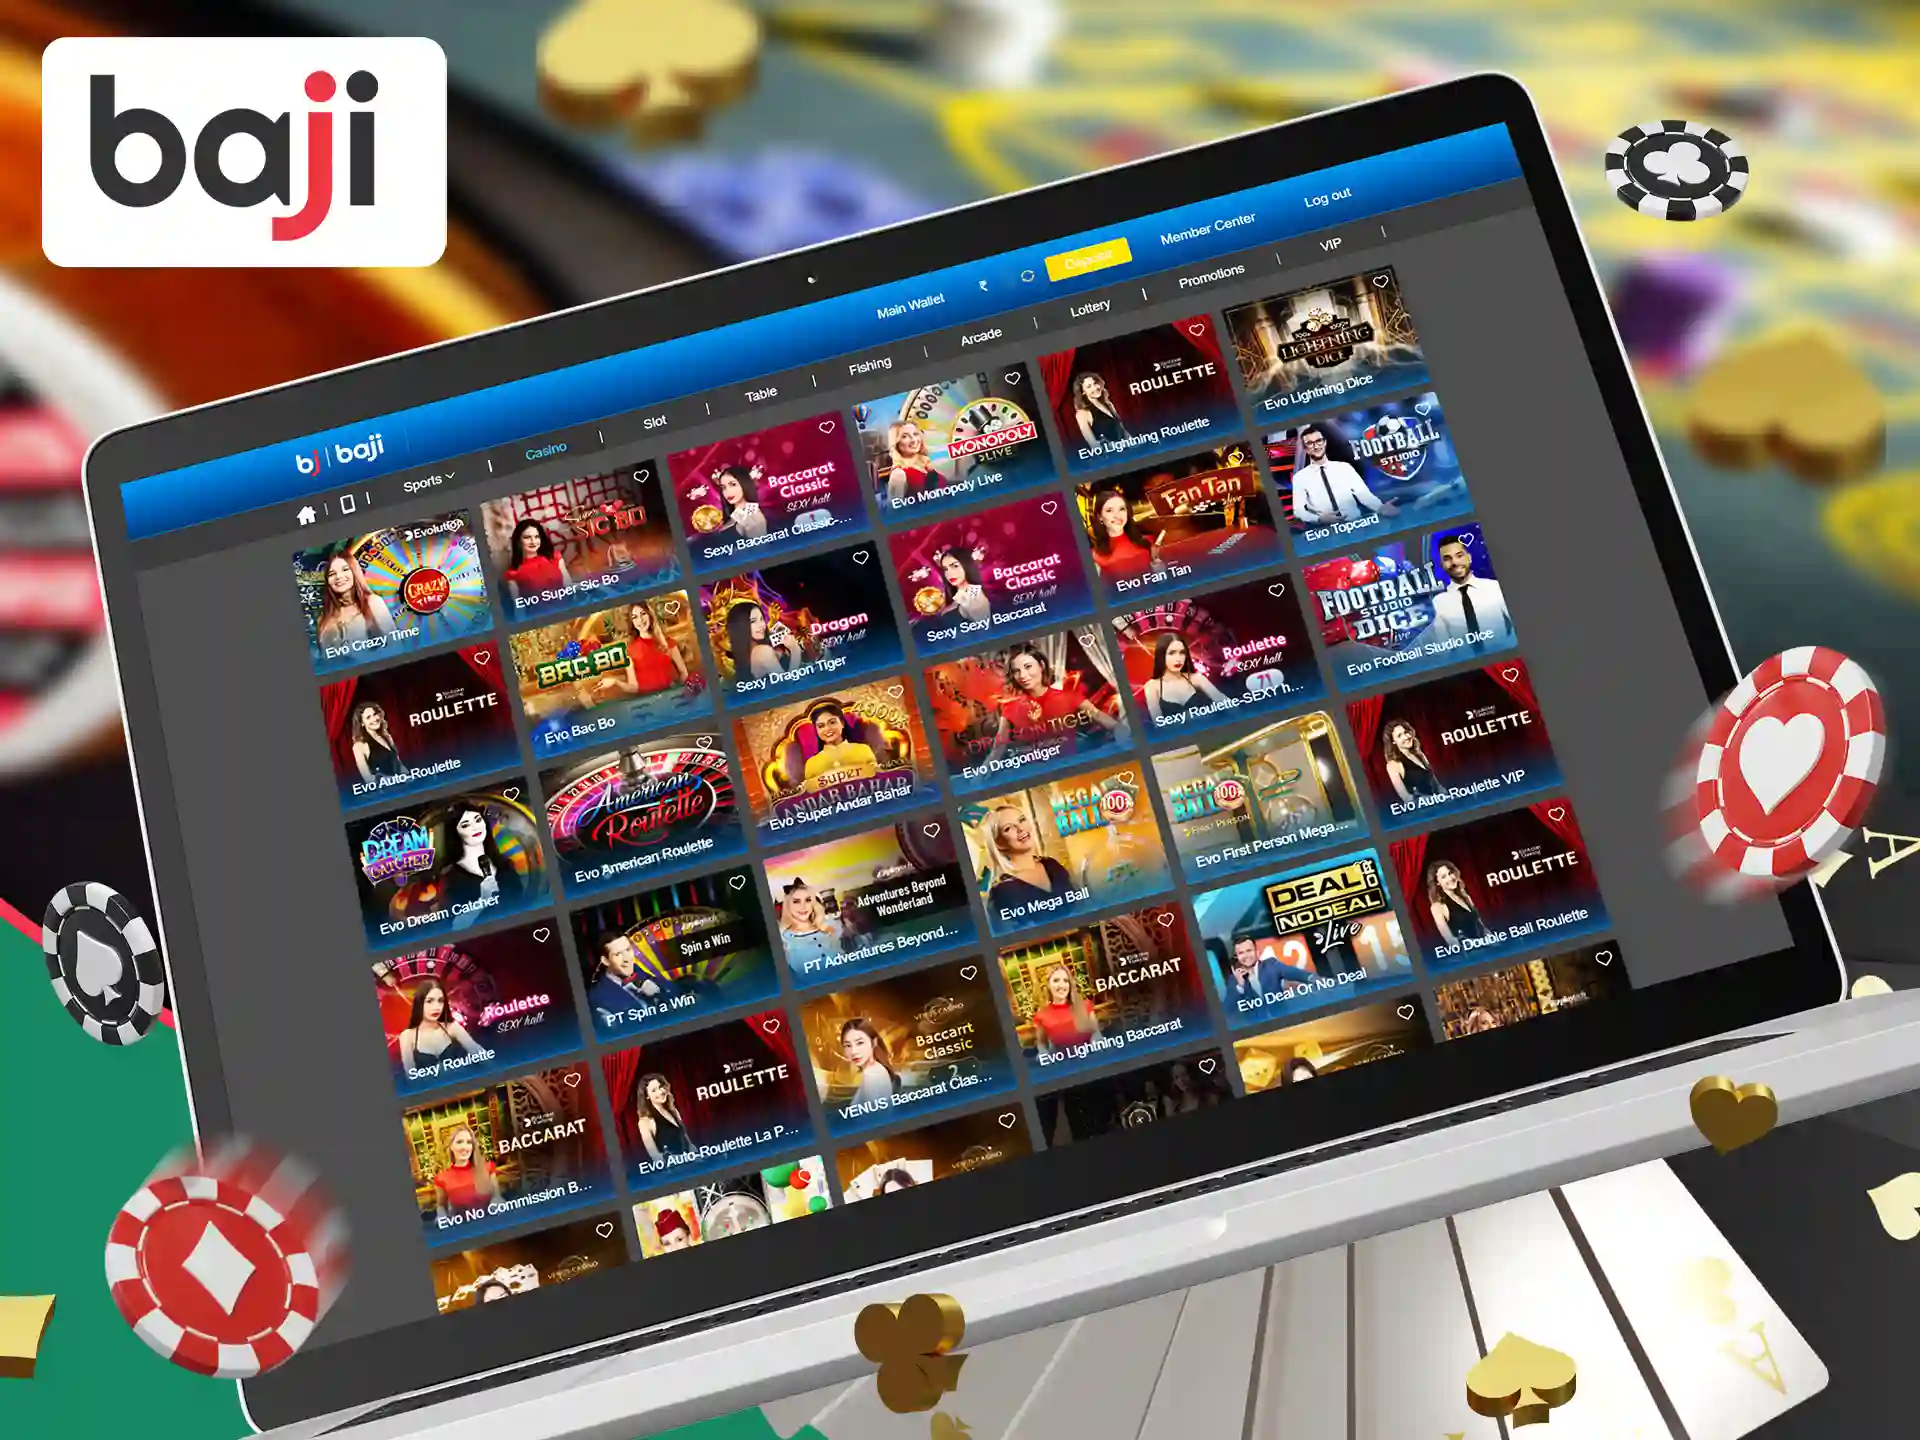 The Baji Bet website has tons of casino games and slots for all tastes, come in and play.